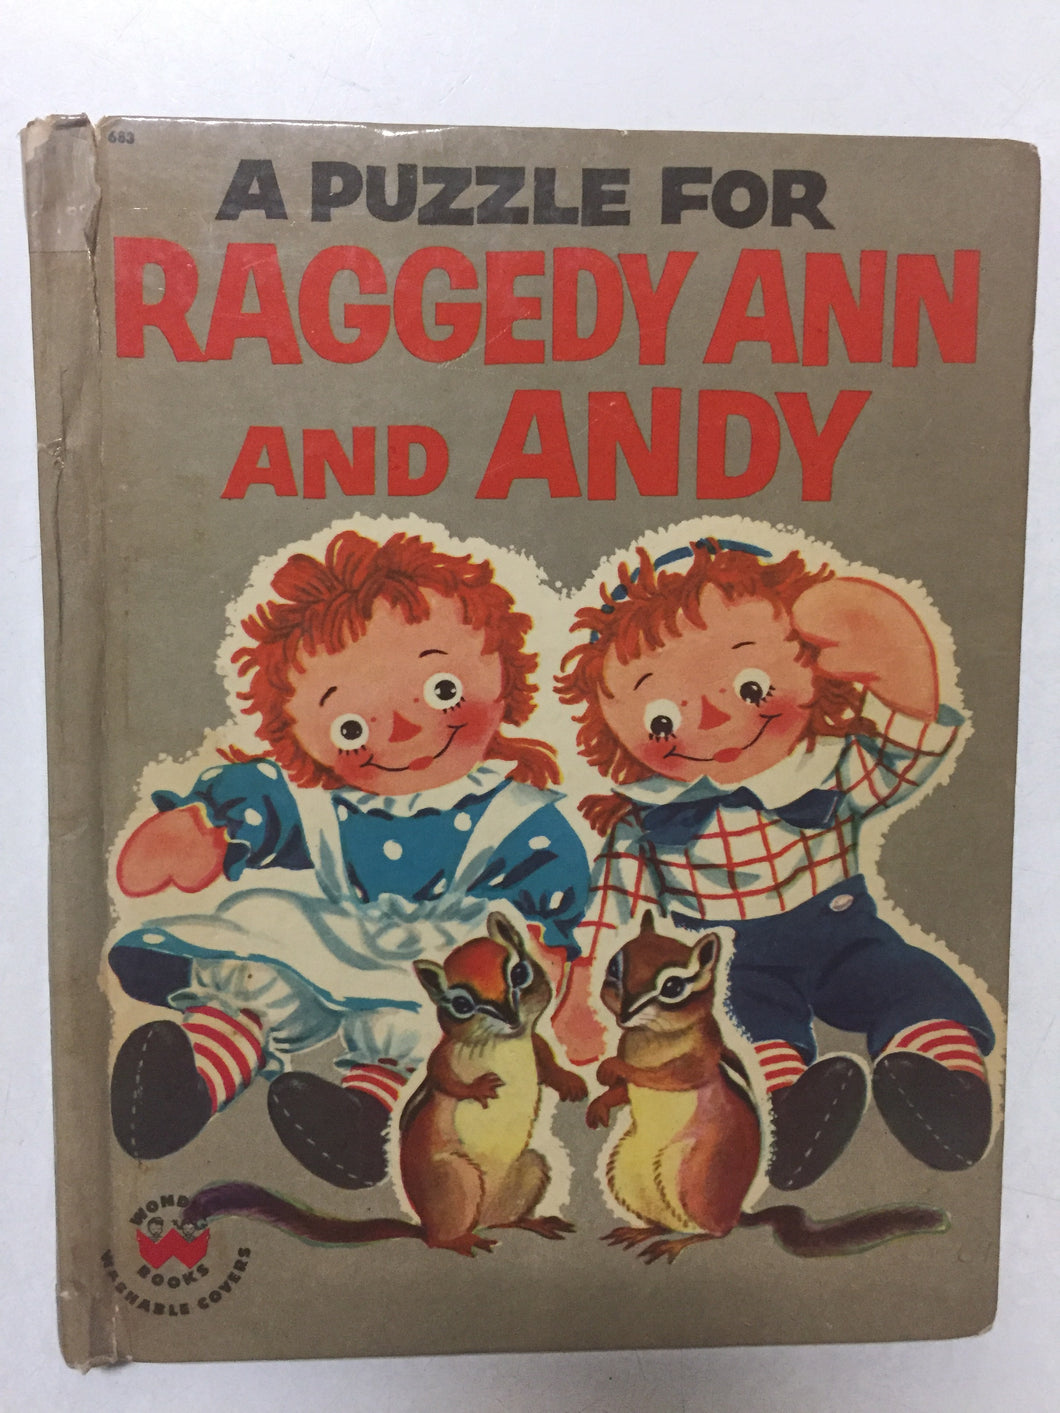 A Puzzle for Raggedy Ann and Andy - Slick Cat Books 